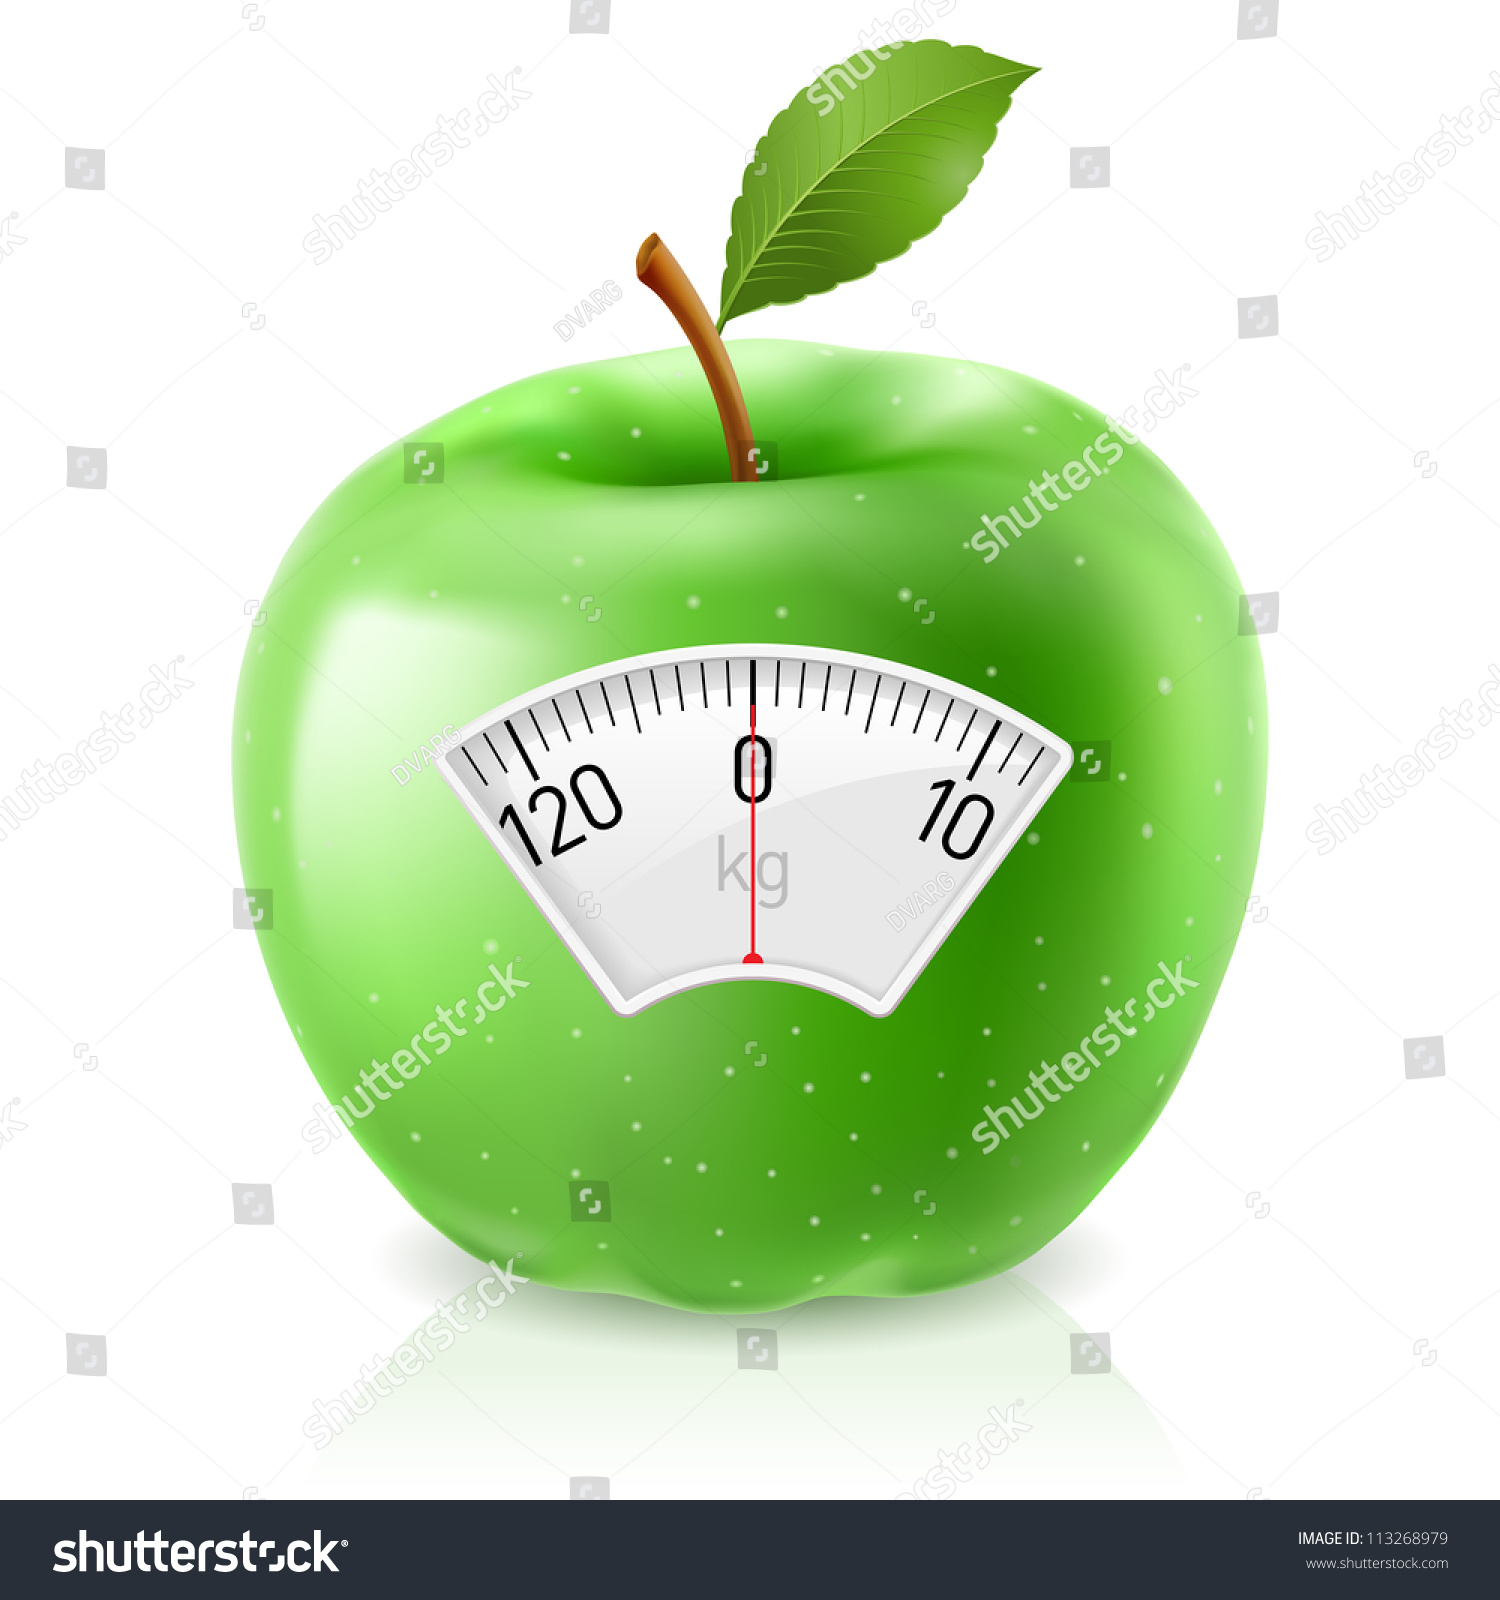 Raster Version Green Apple Scale Weighing Stock Illustration ...